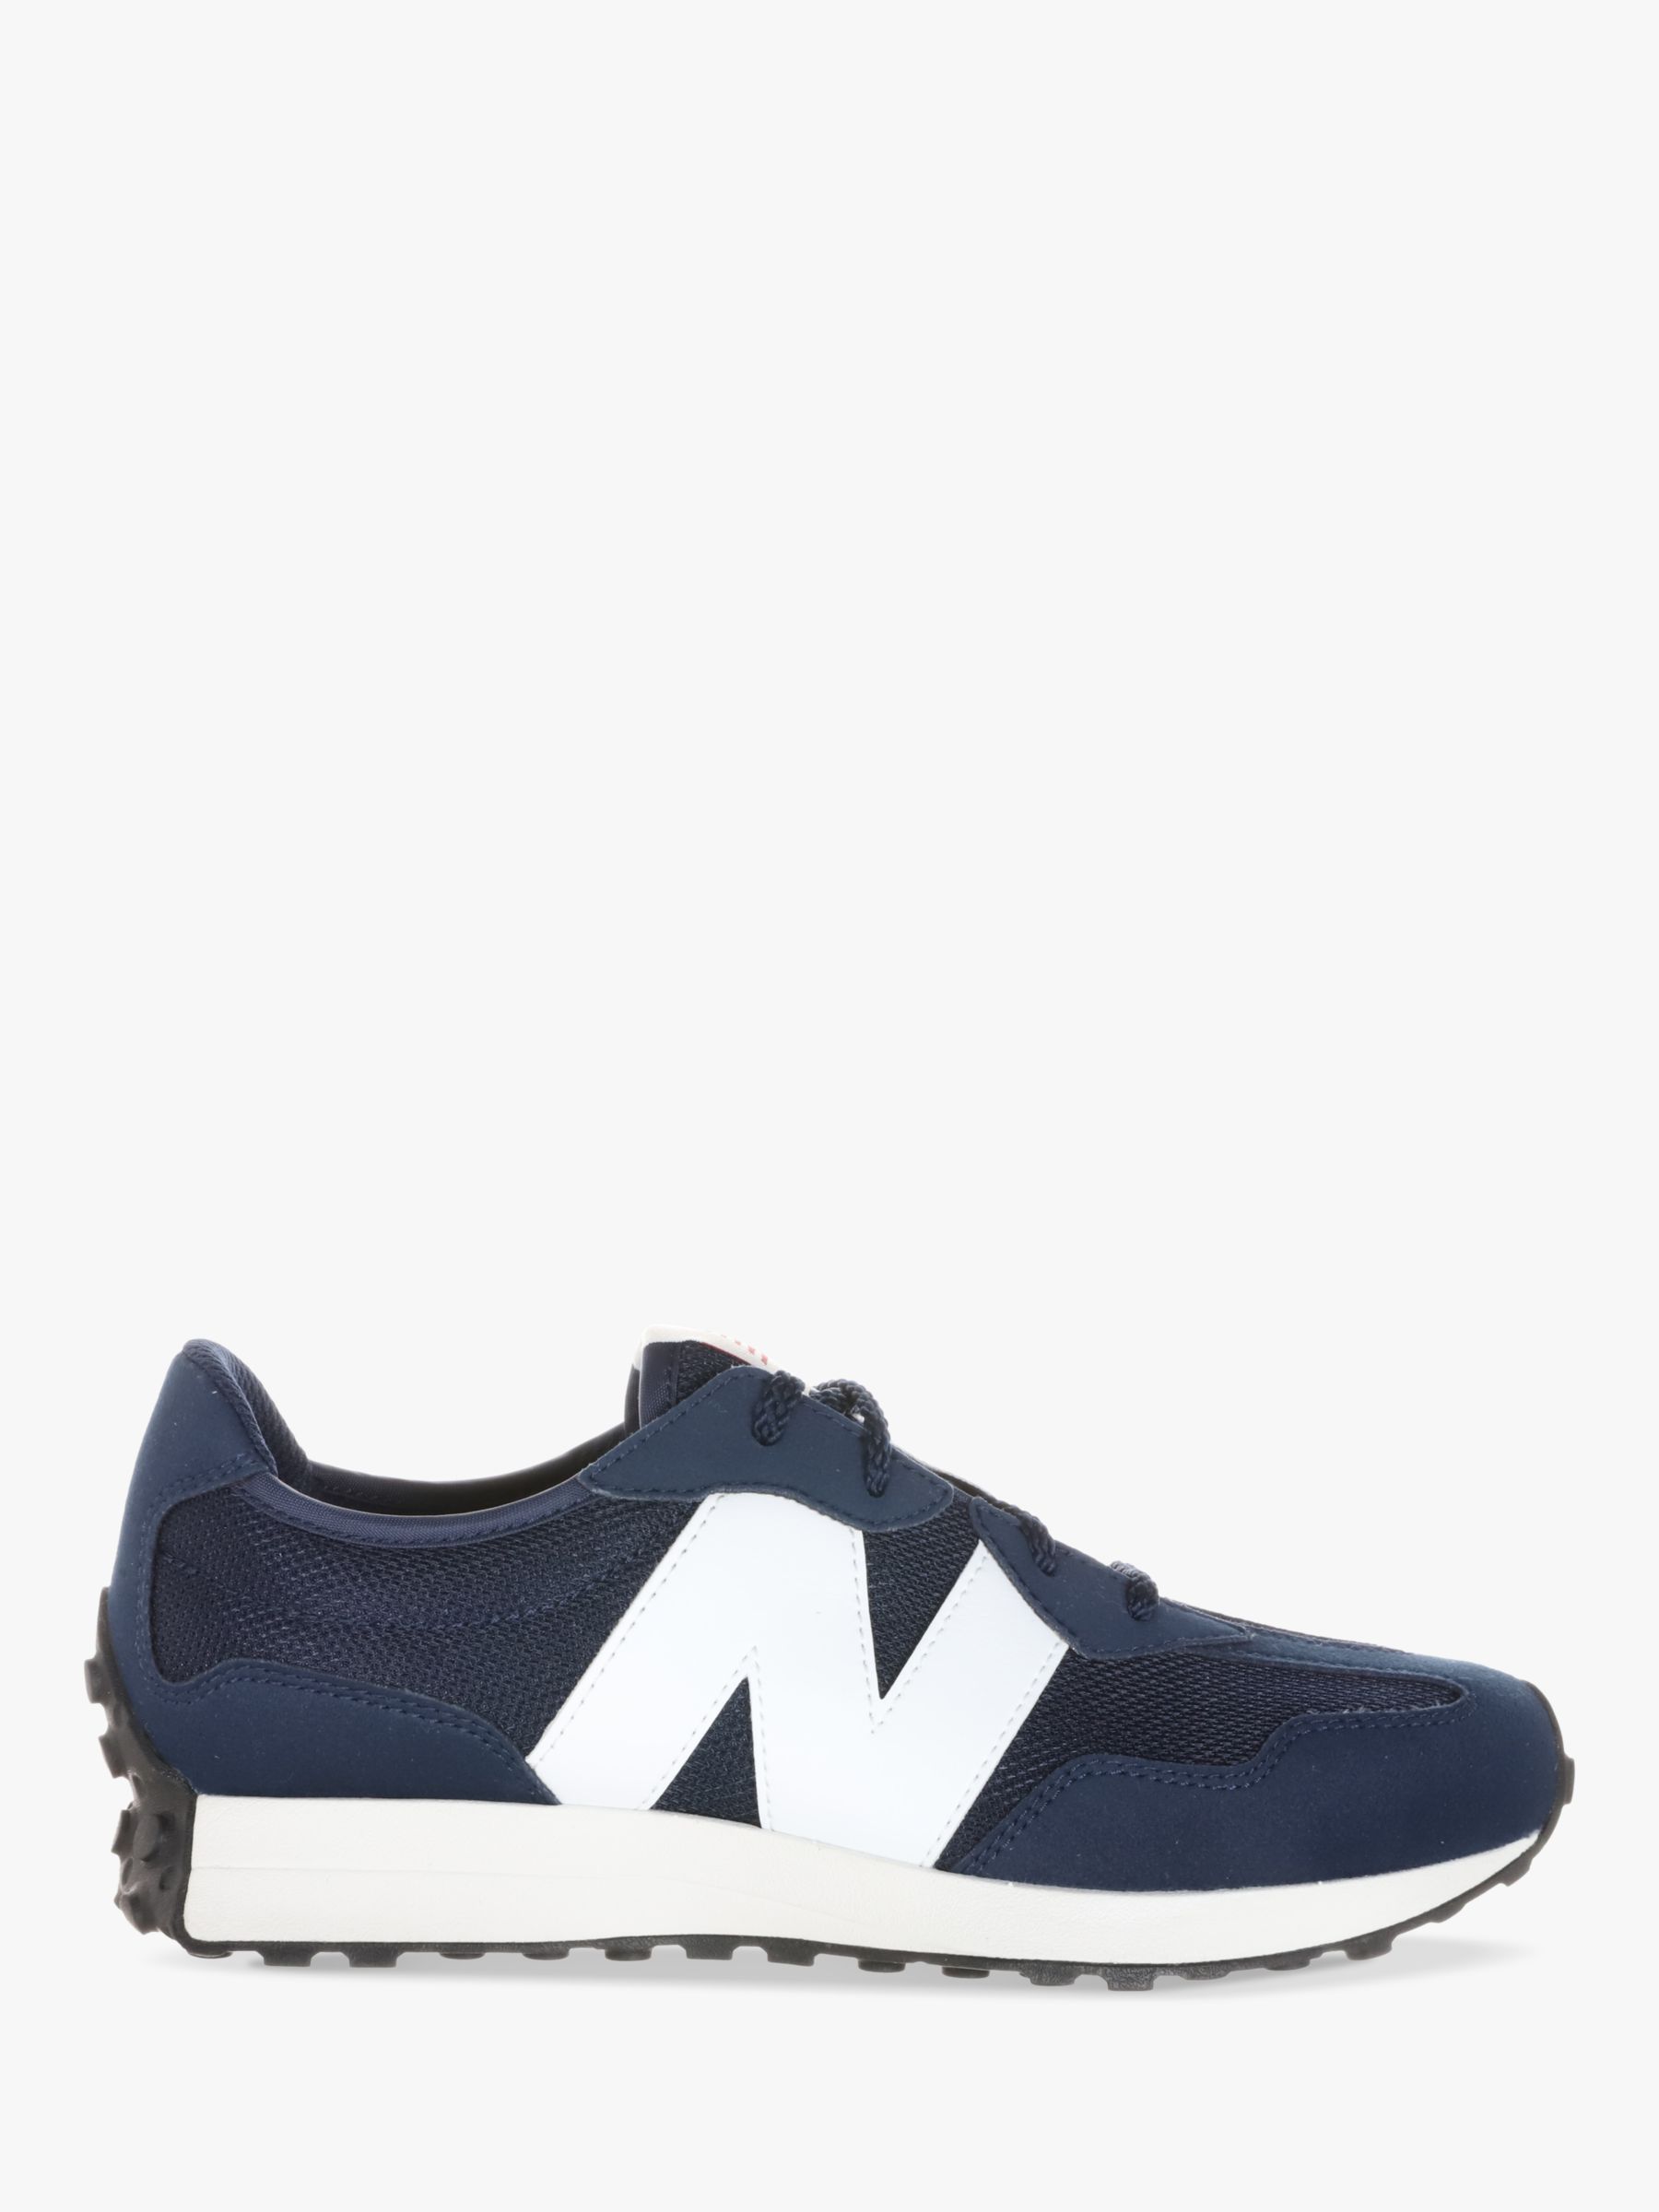 Buy New Balance Kids' 327 Lace Up Trainers Online at johnlewis.com